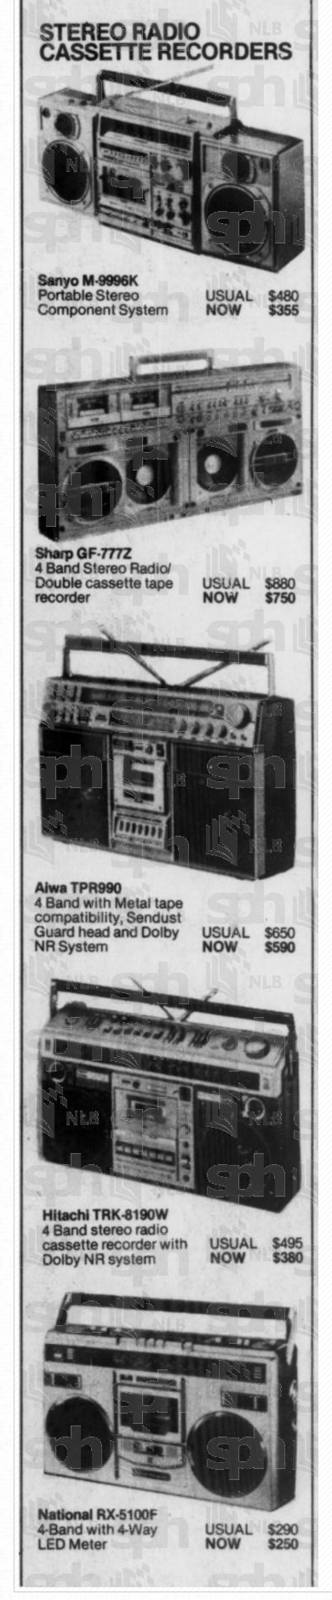 Boombox Pricing 1981 Singapore.png